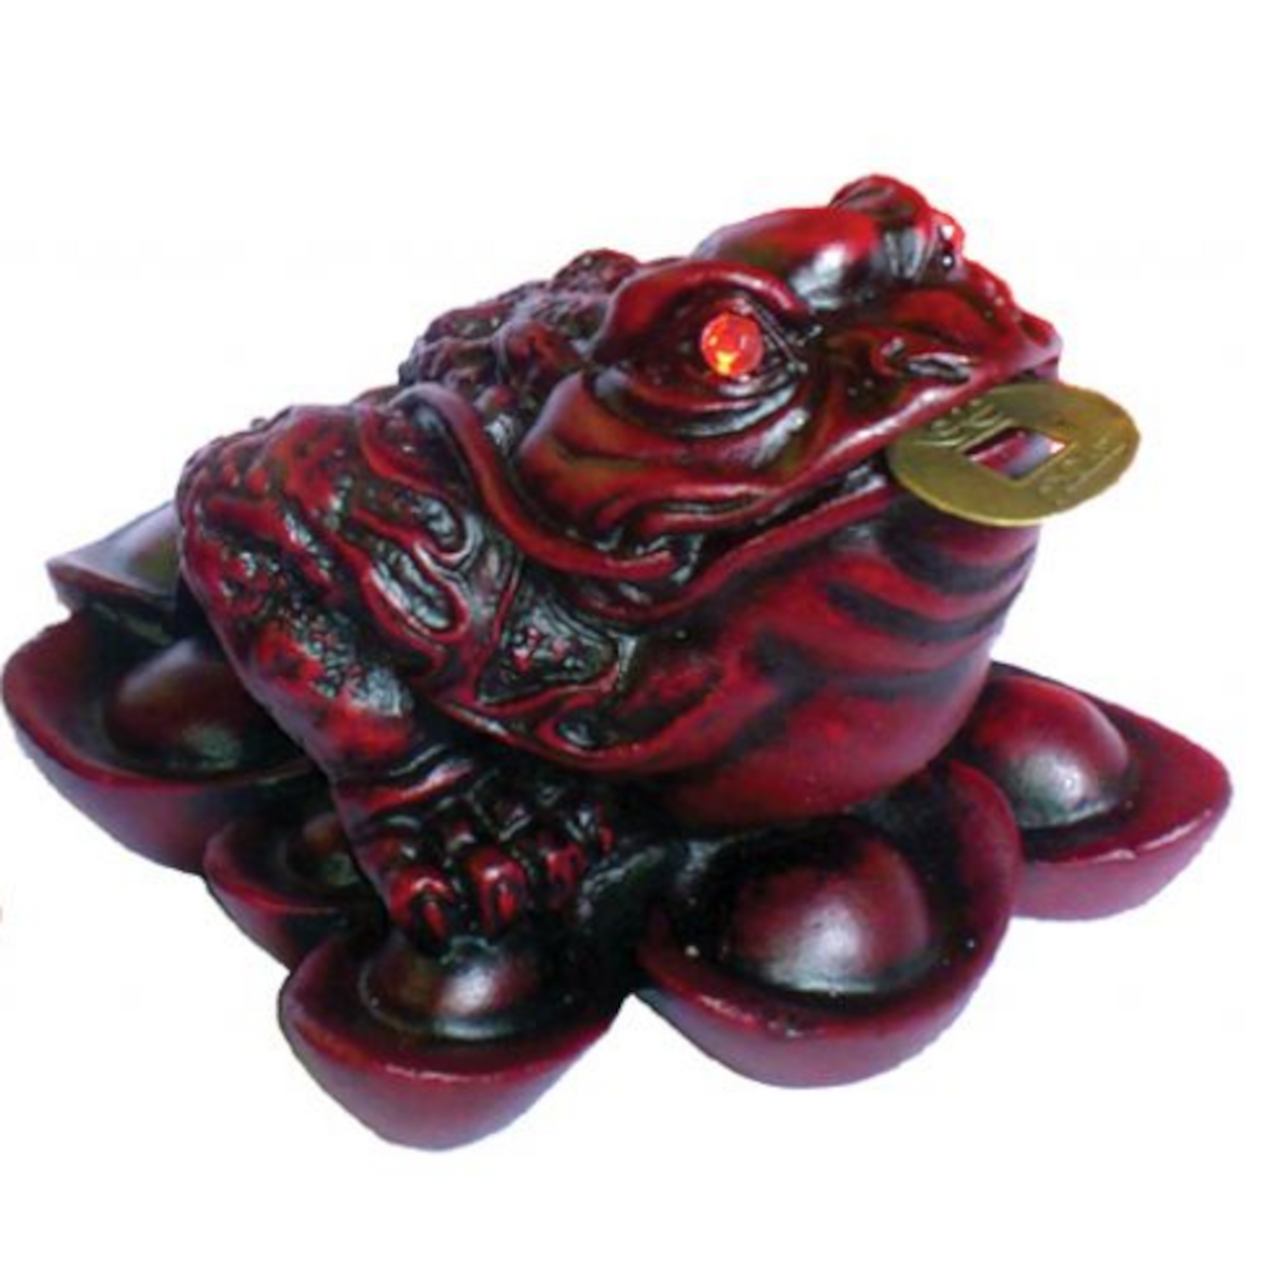 Three Legged Money Toad - Small 8cm - Red Resin - Feng Shui